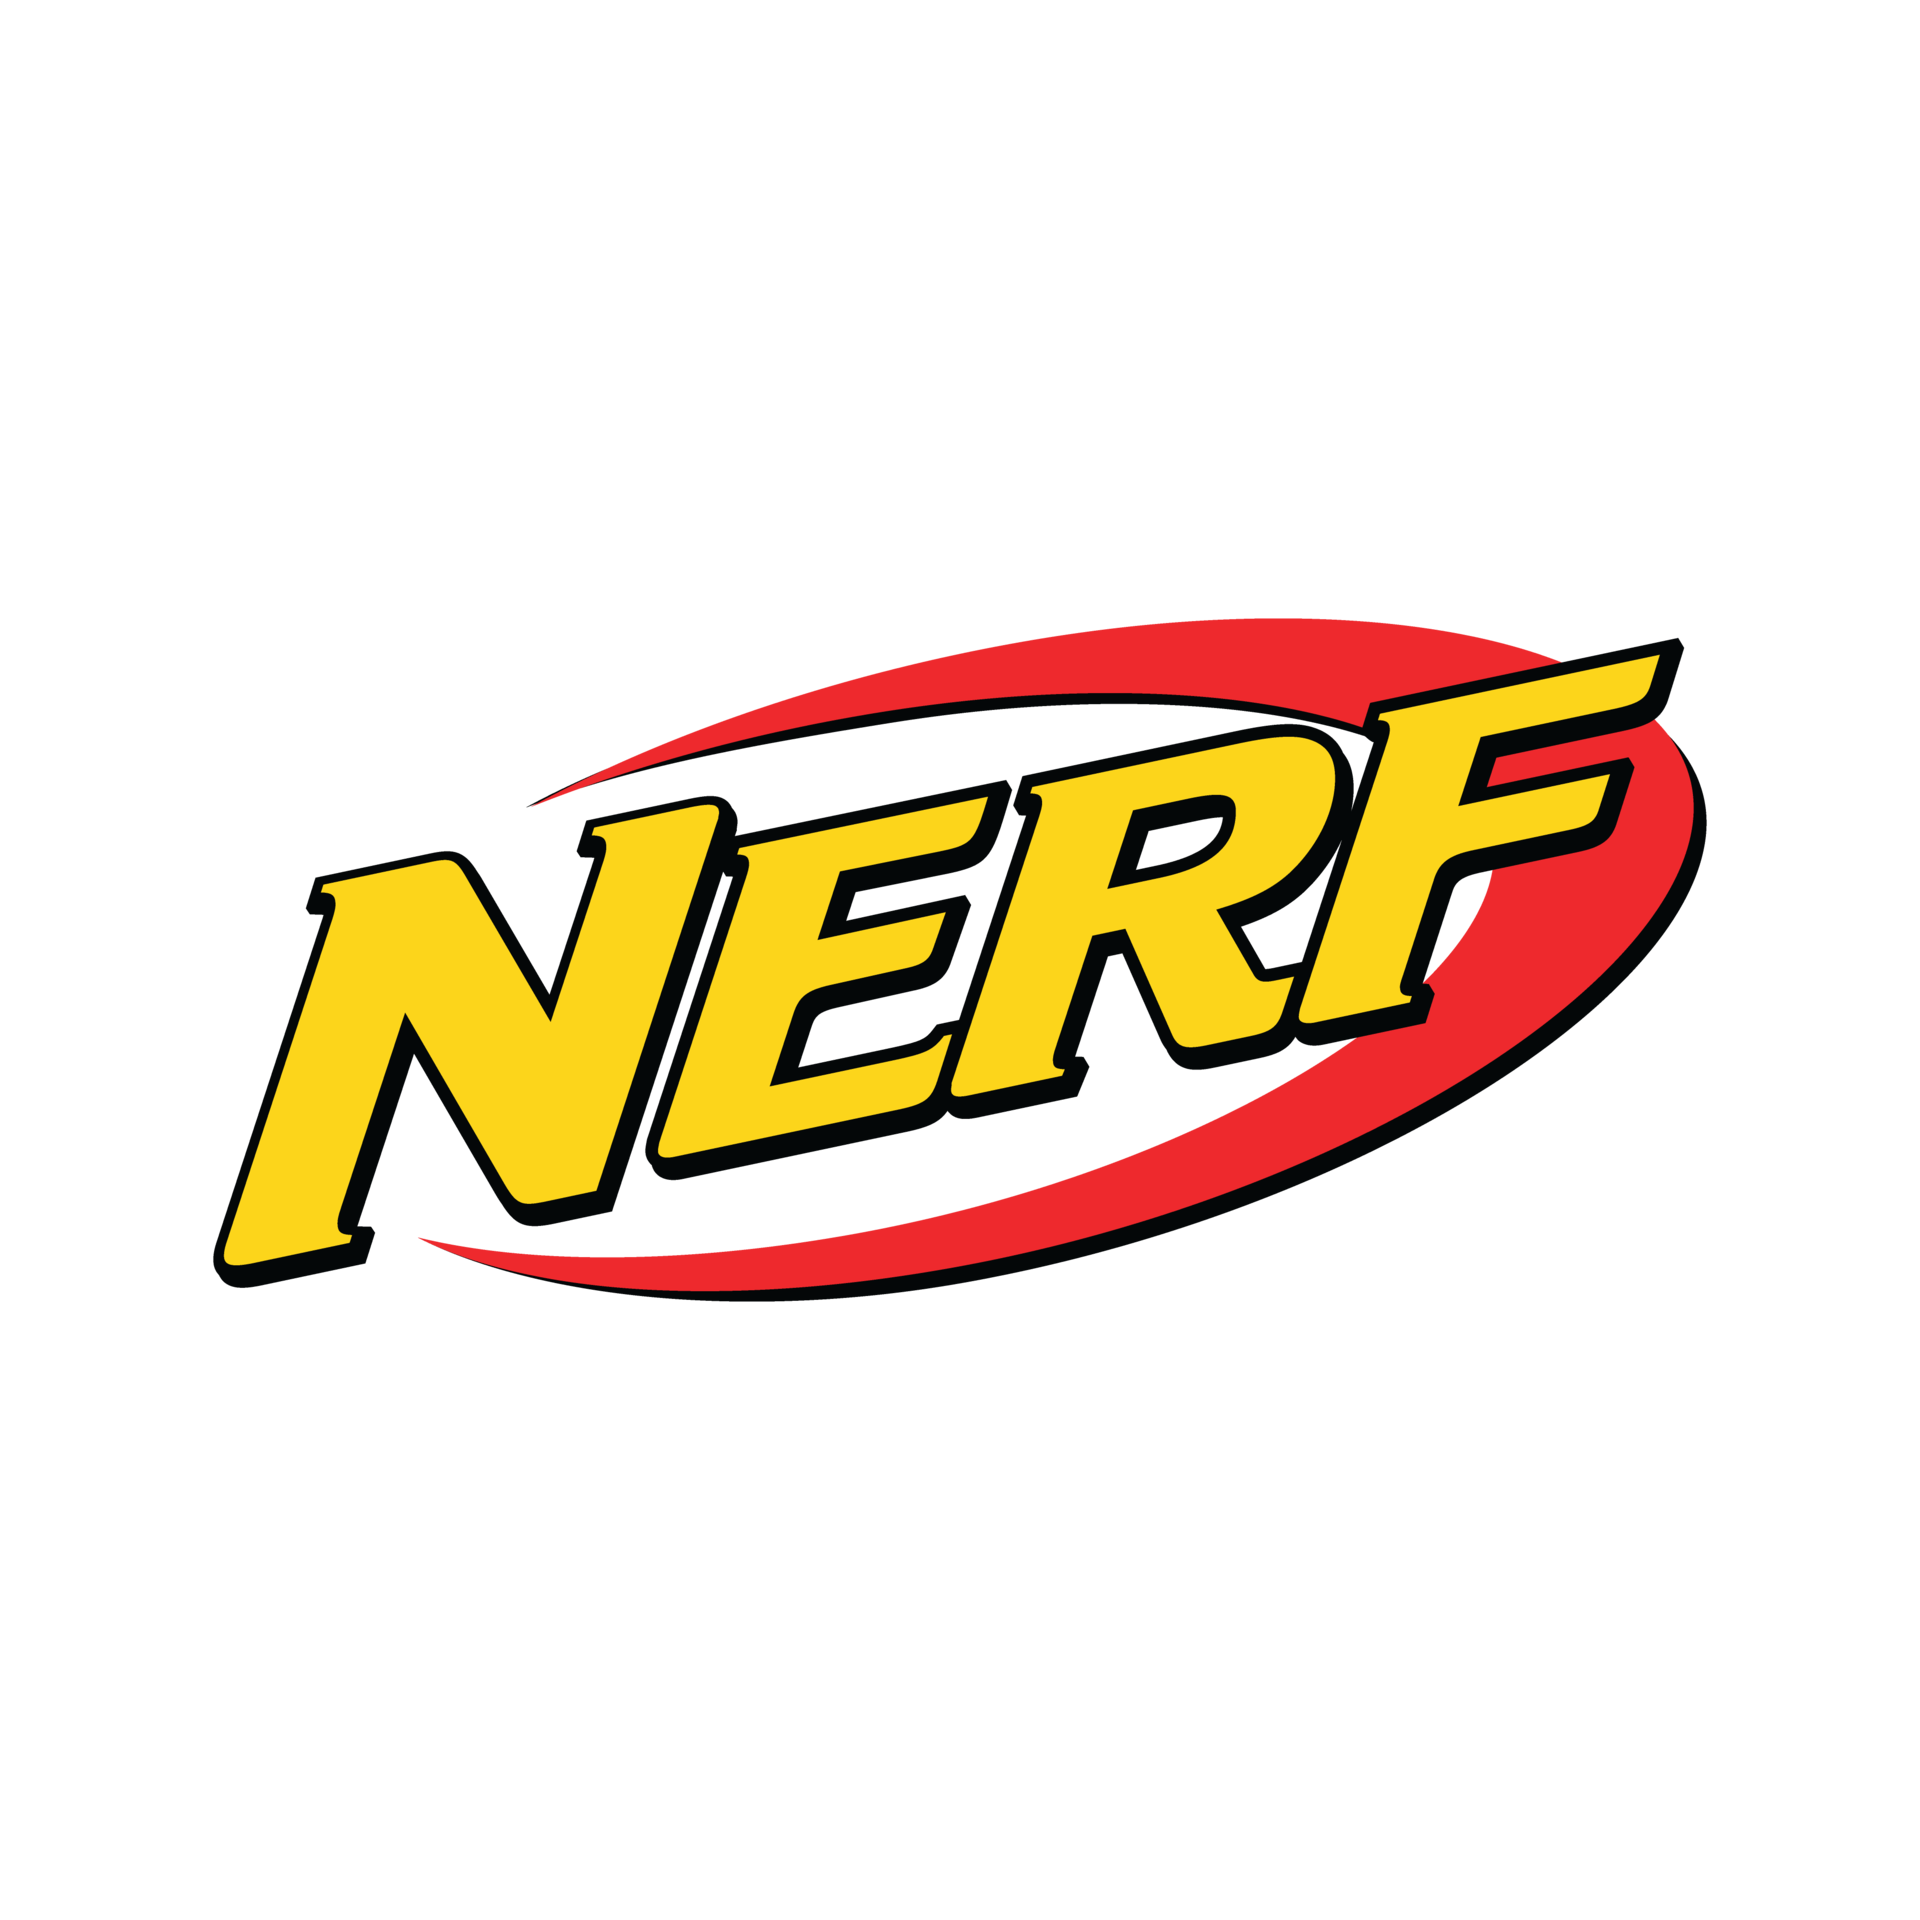 Nerf logo png, Nerf icon transparent png 27127466 PNG